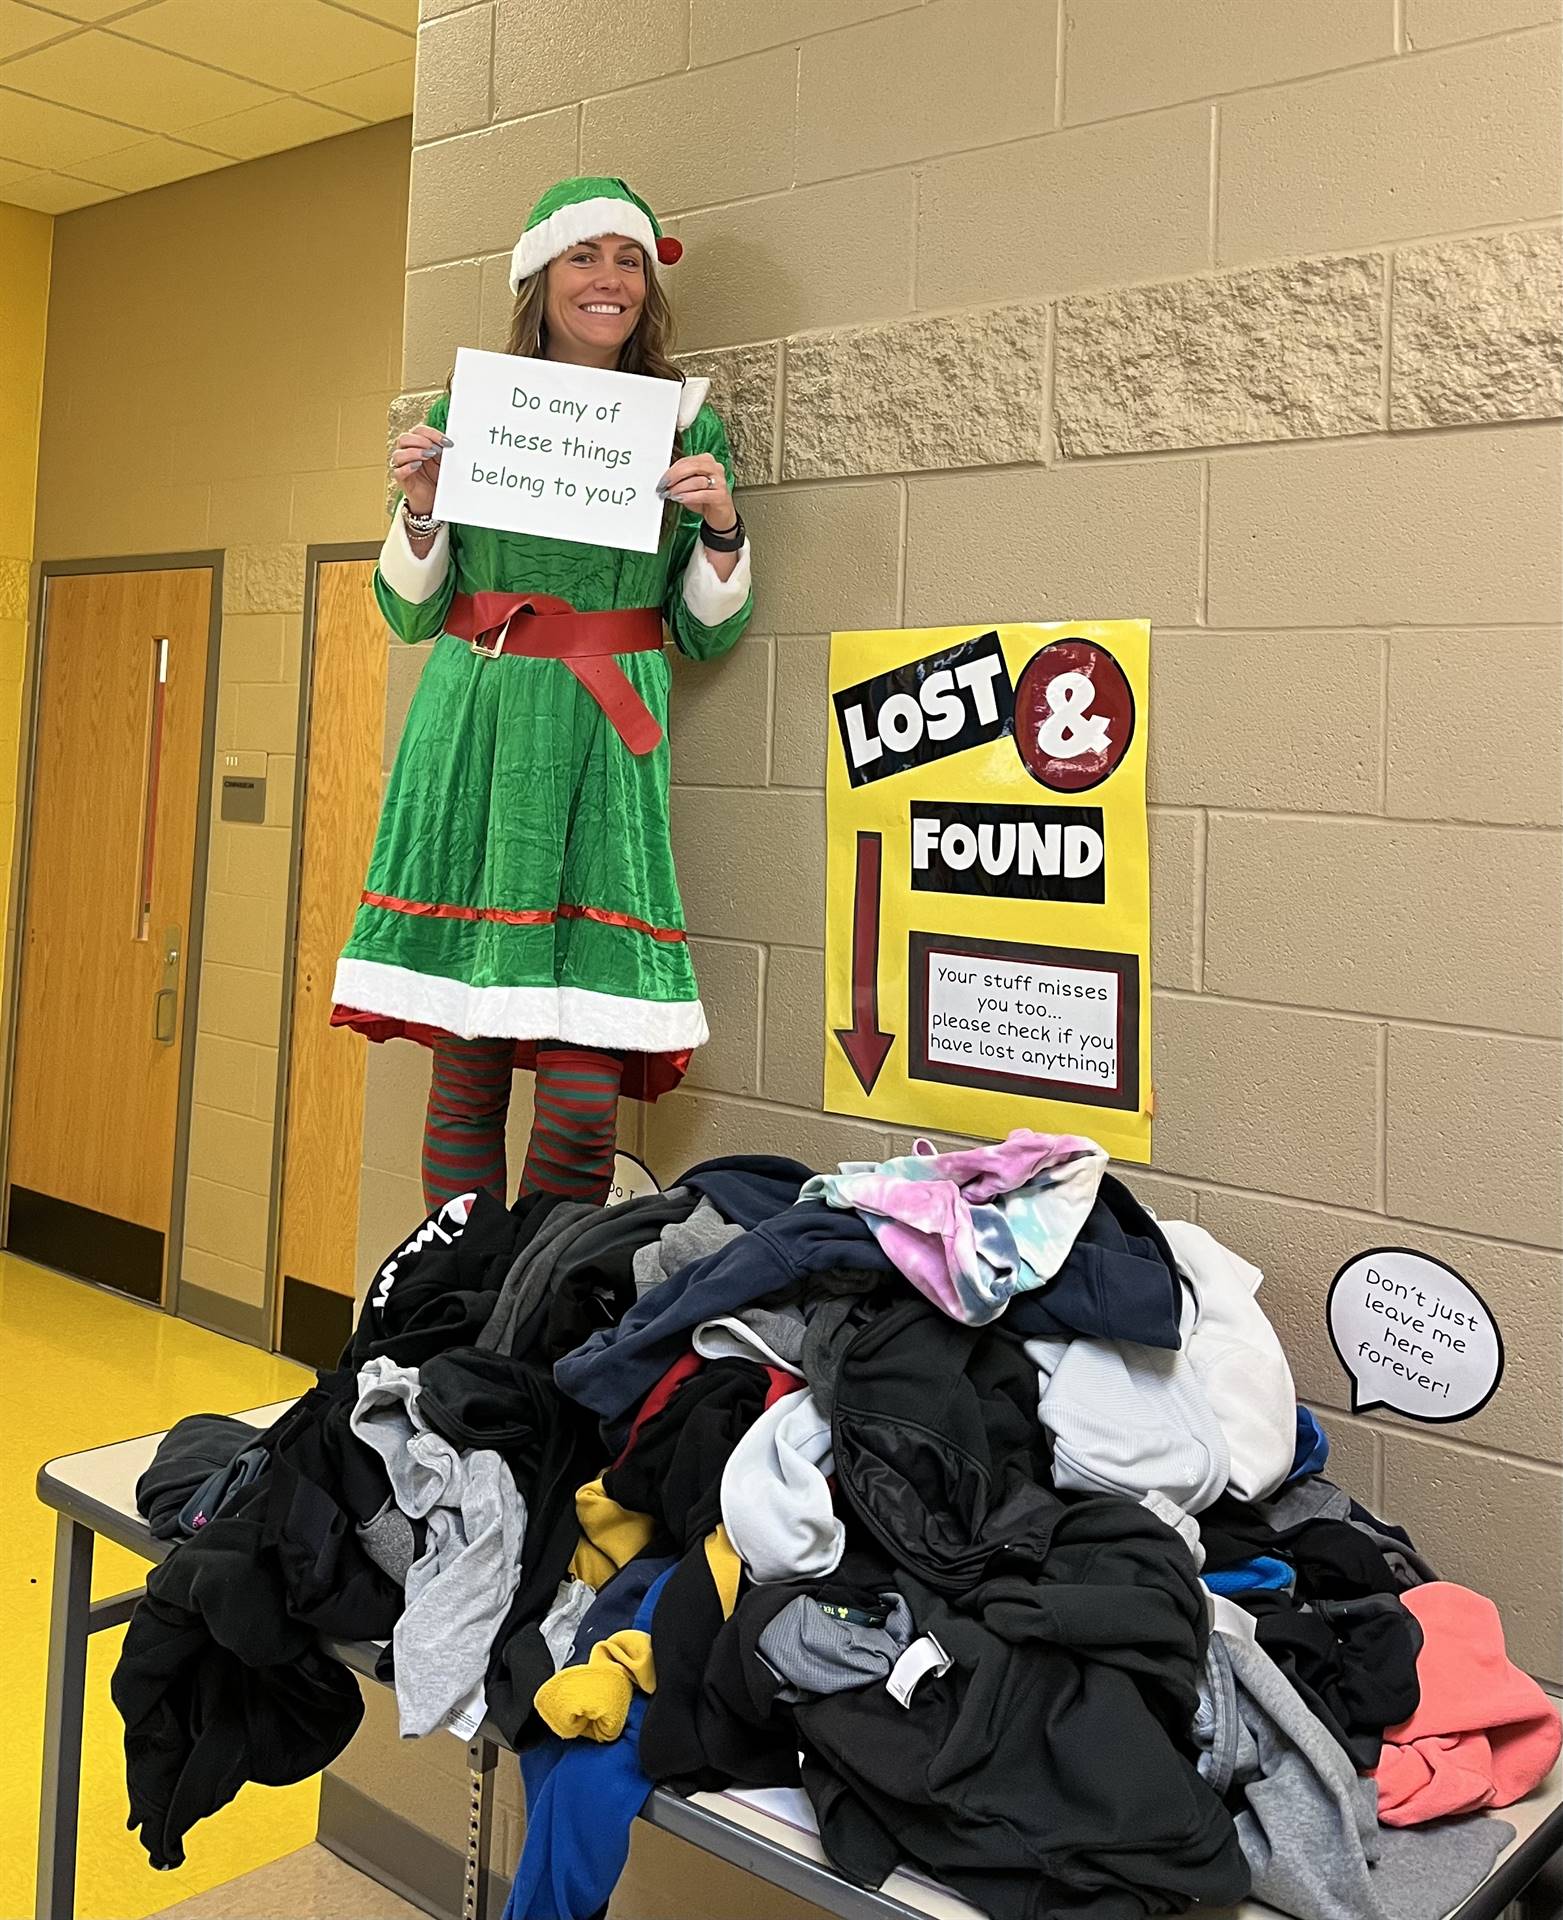 Principal Crawford dressed in elf costume standing on table holing a sign that reads "Does any of th